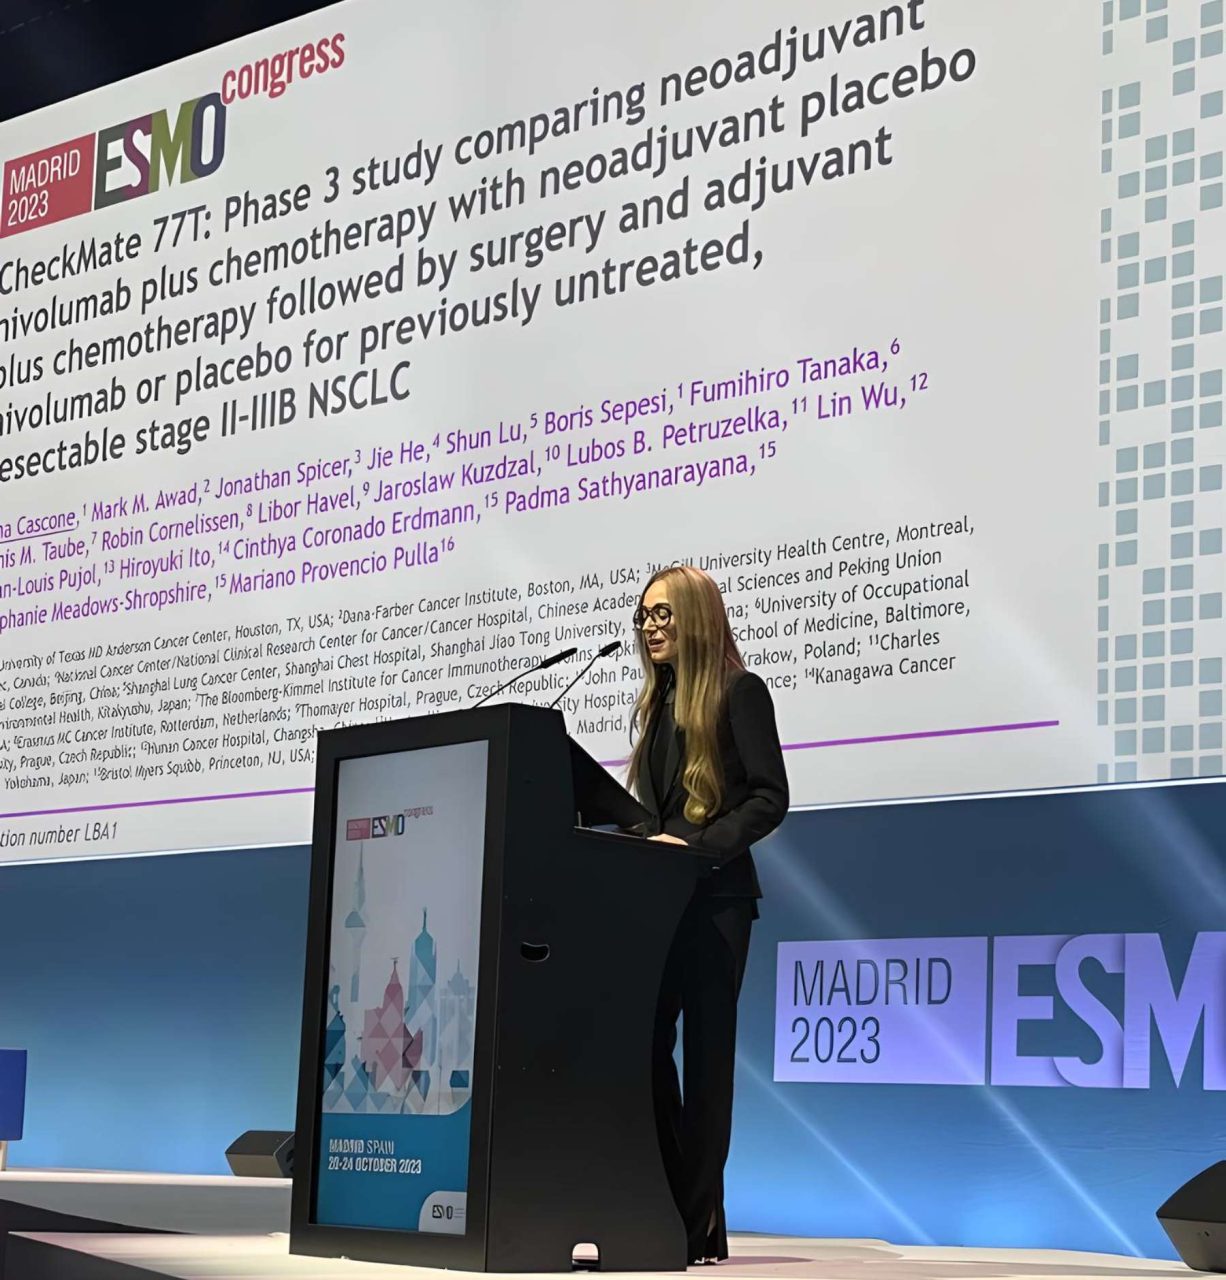 Giulio Draetta: Tremendously proud of Tina Cascone for her presentation at the 2023 ESMO meeting presidential session